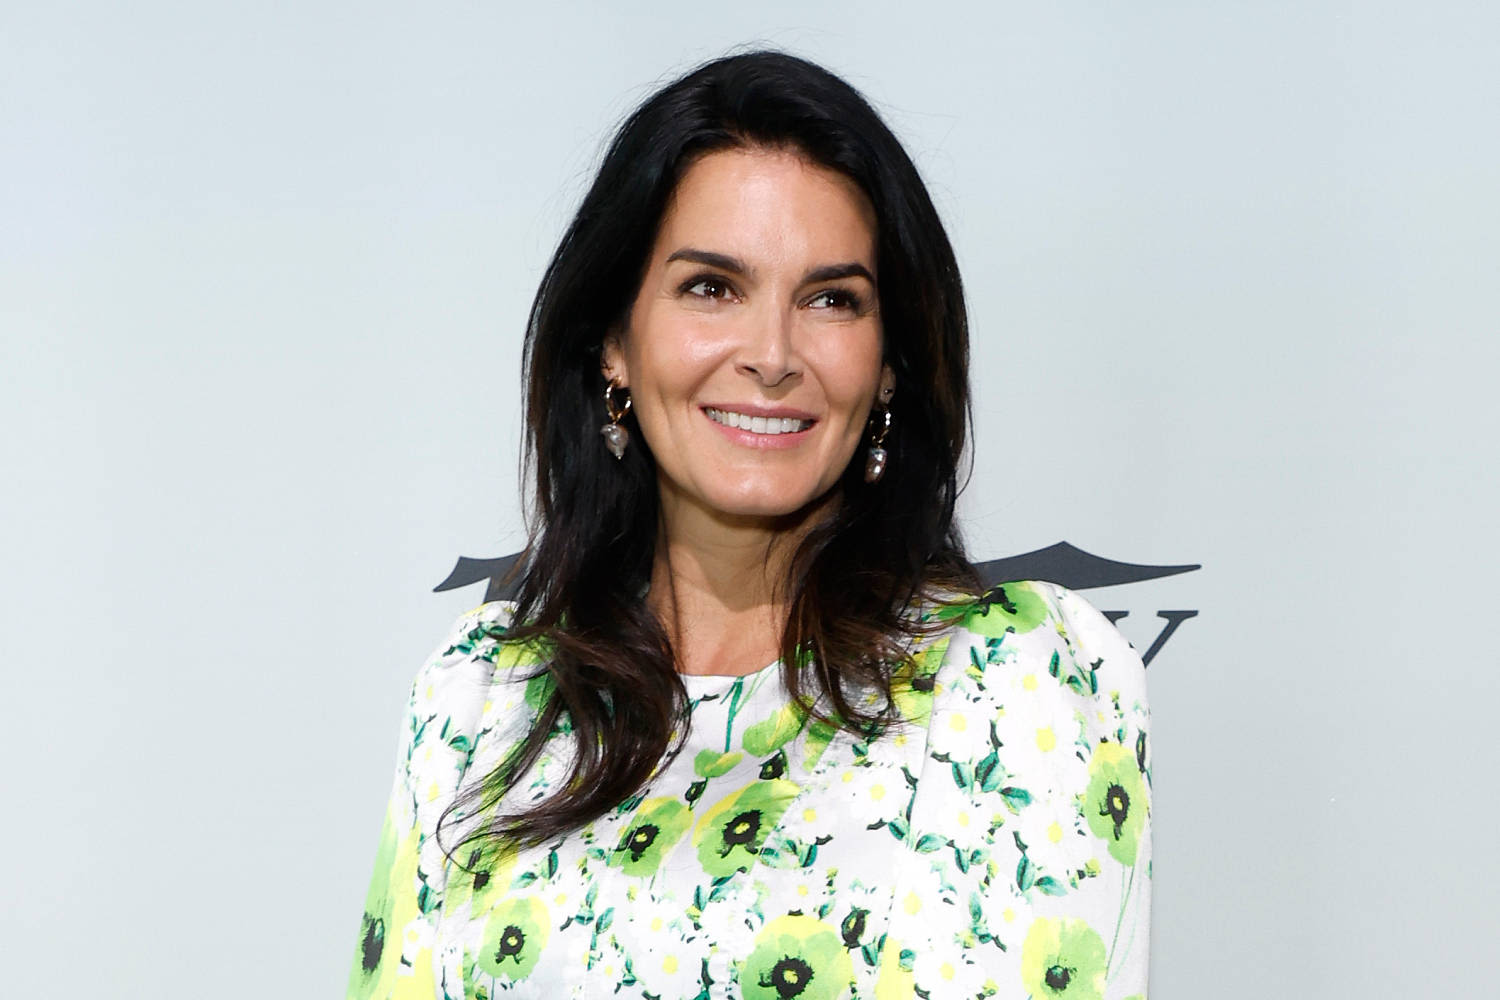 ‘Law & Order’ actress Angie Harmon files suit after dog shot and killed by Instacart shopper